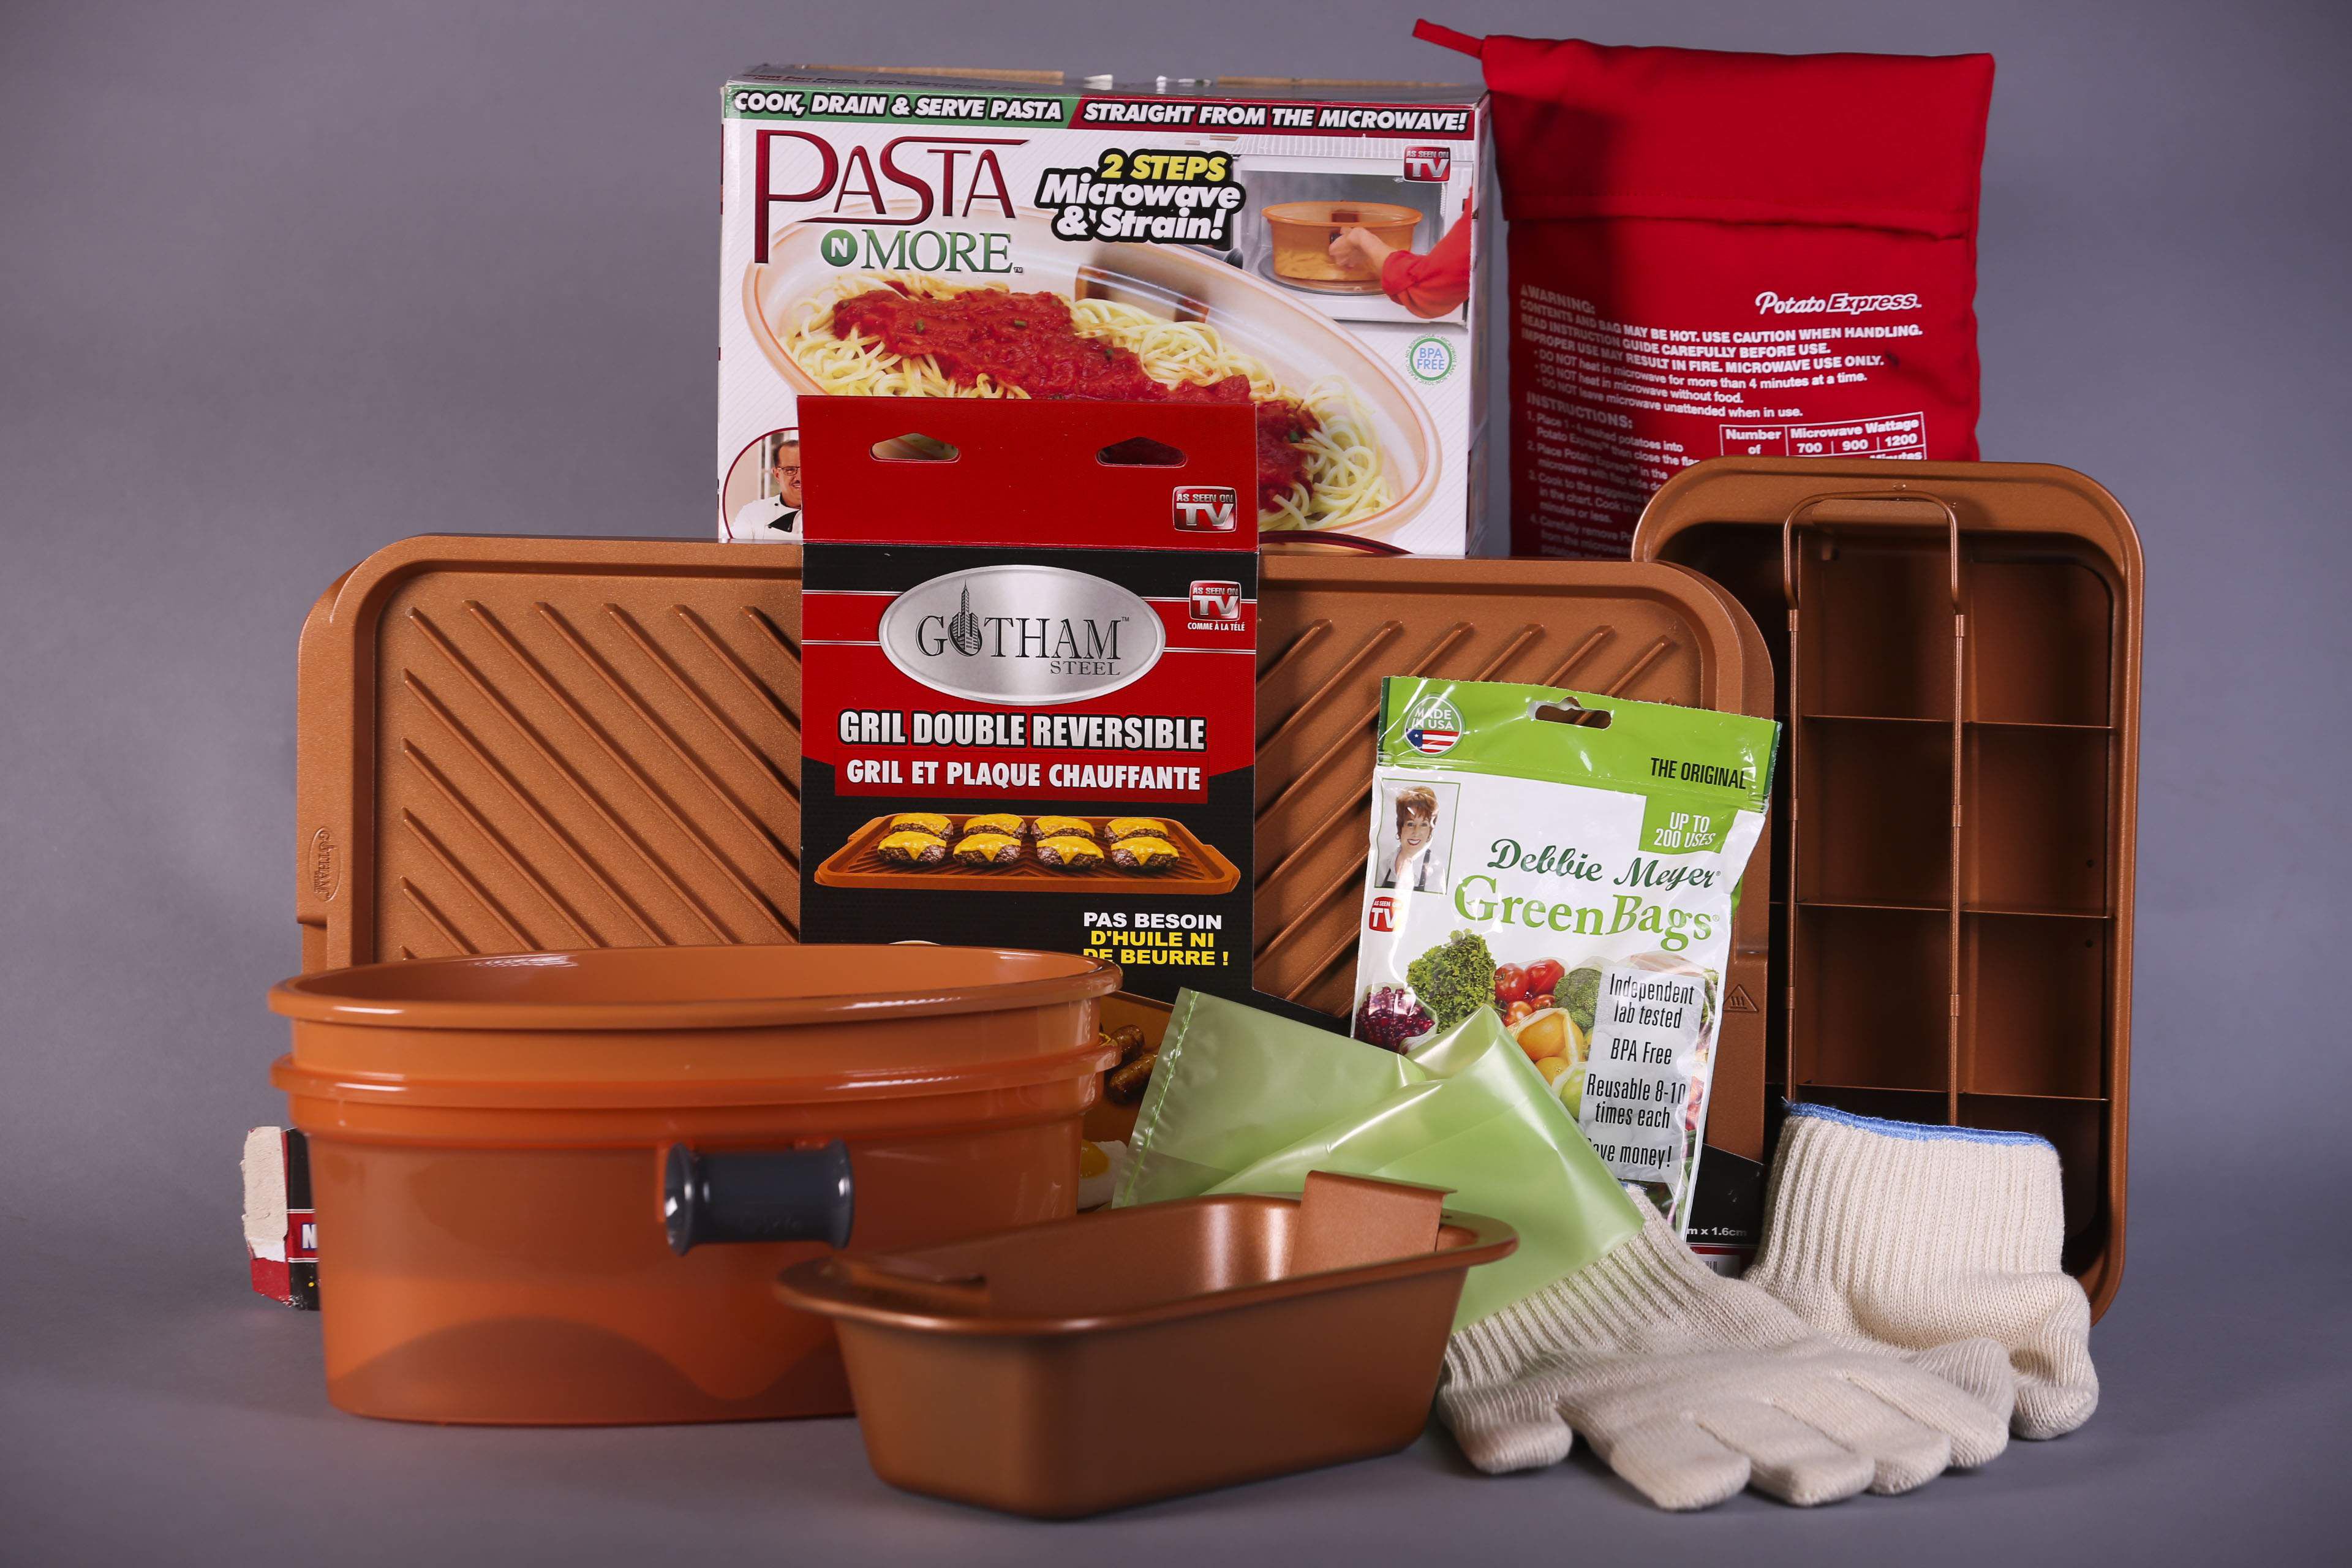 As seen on TV: Red Copper cookware review - The Gadgeteer